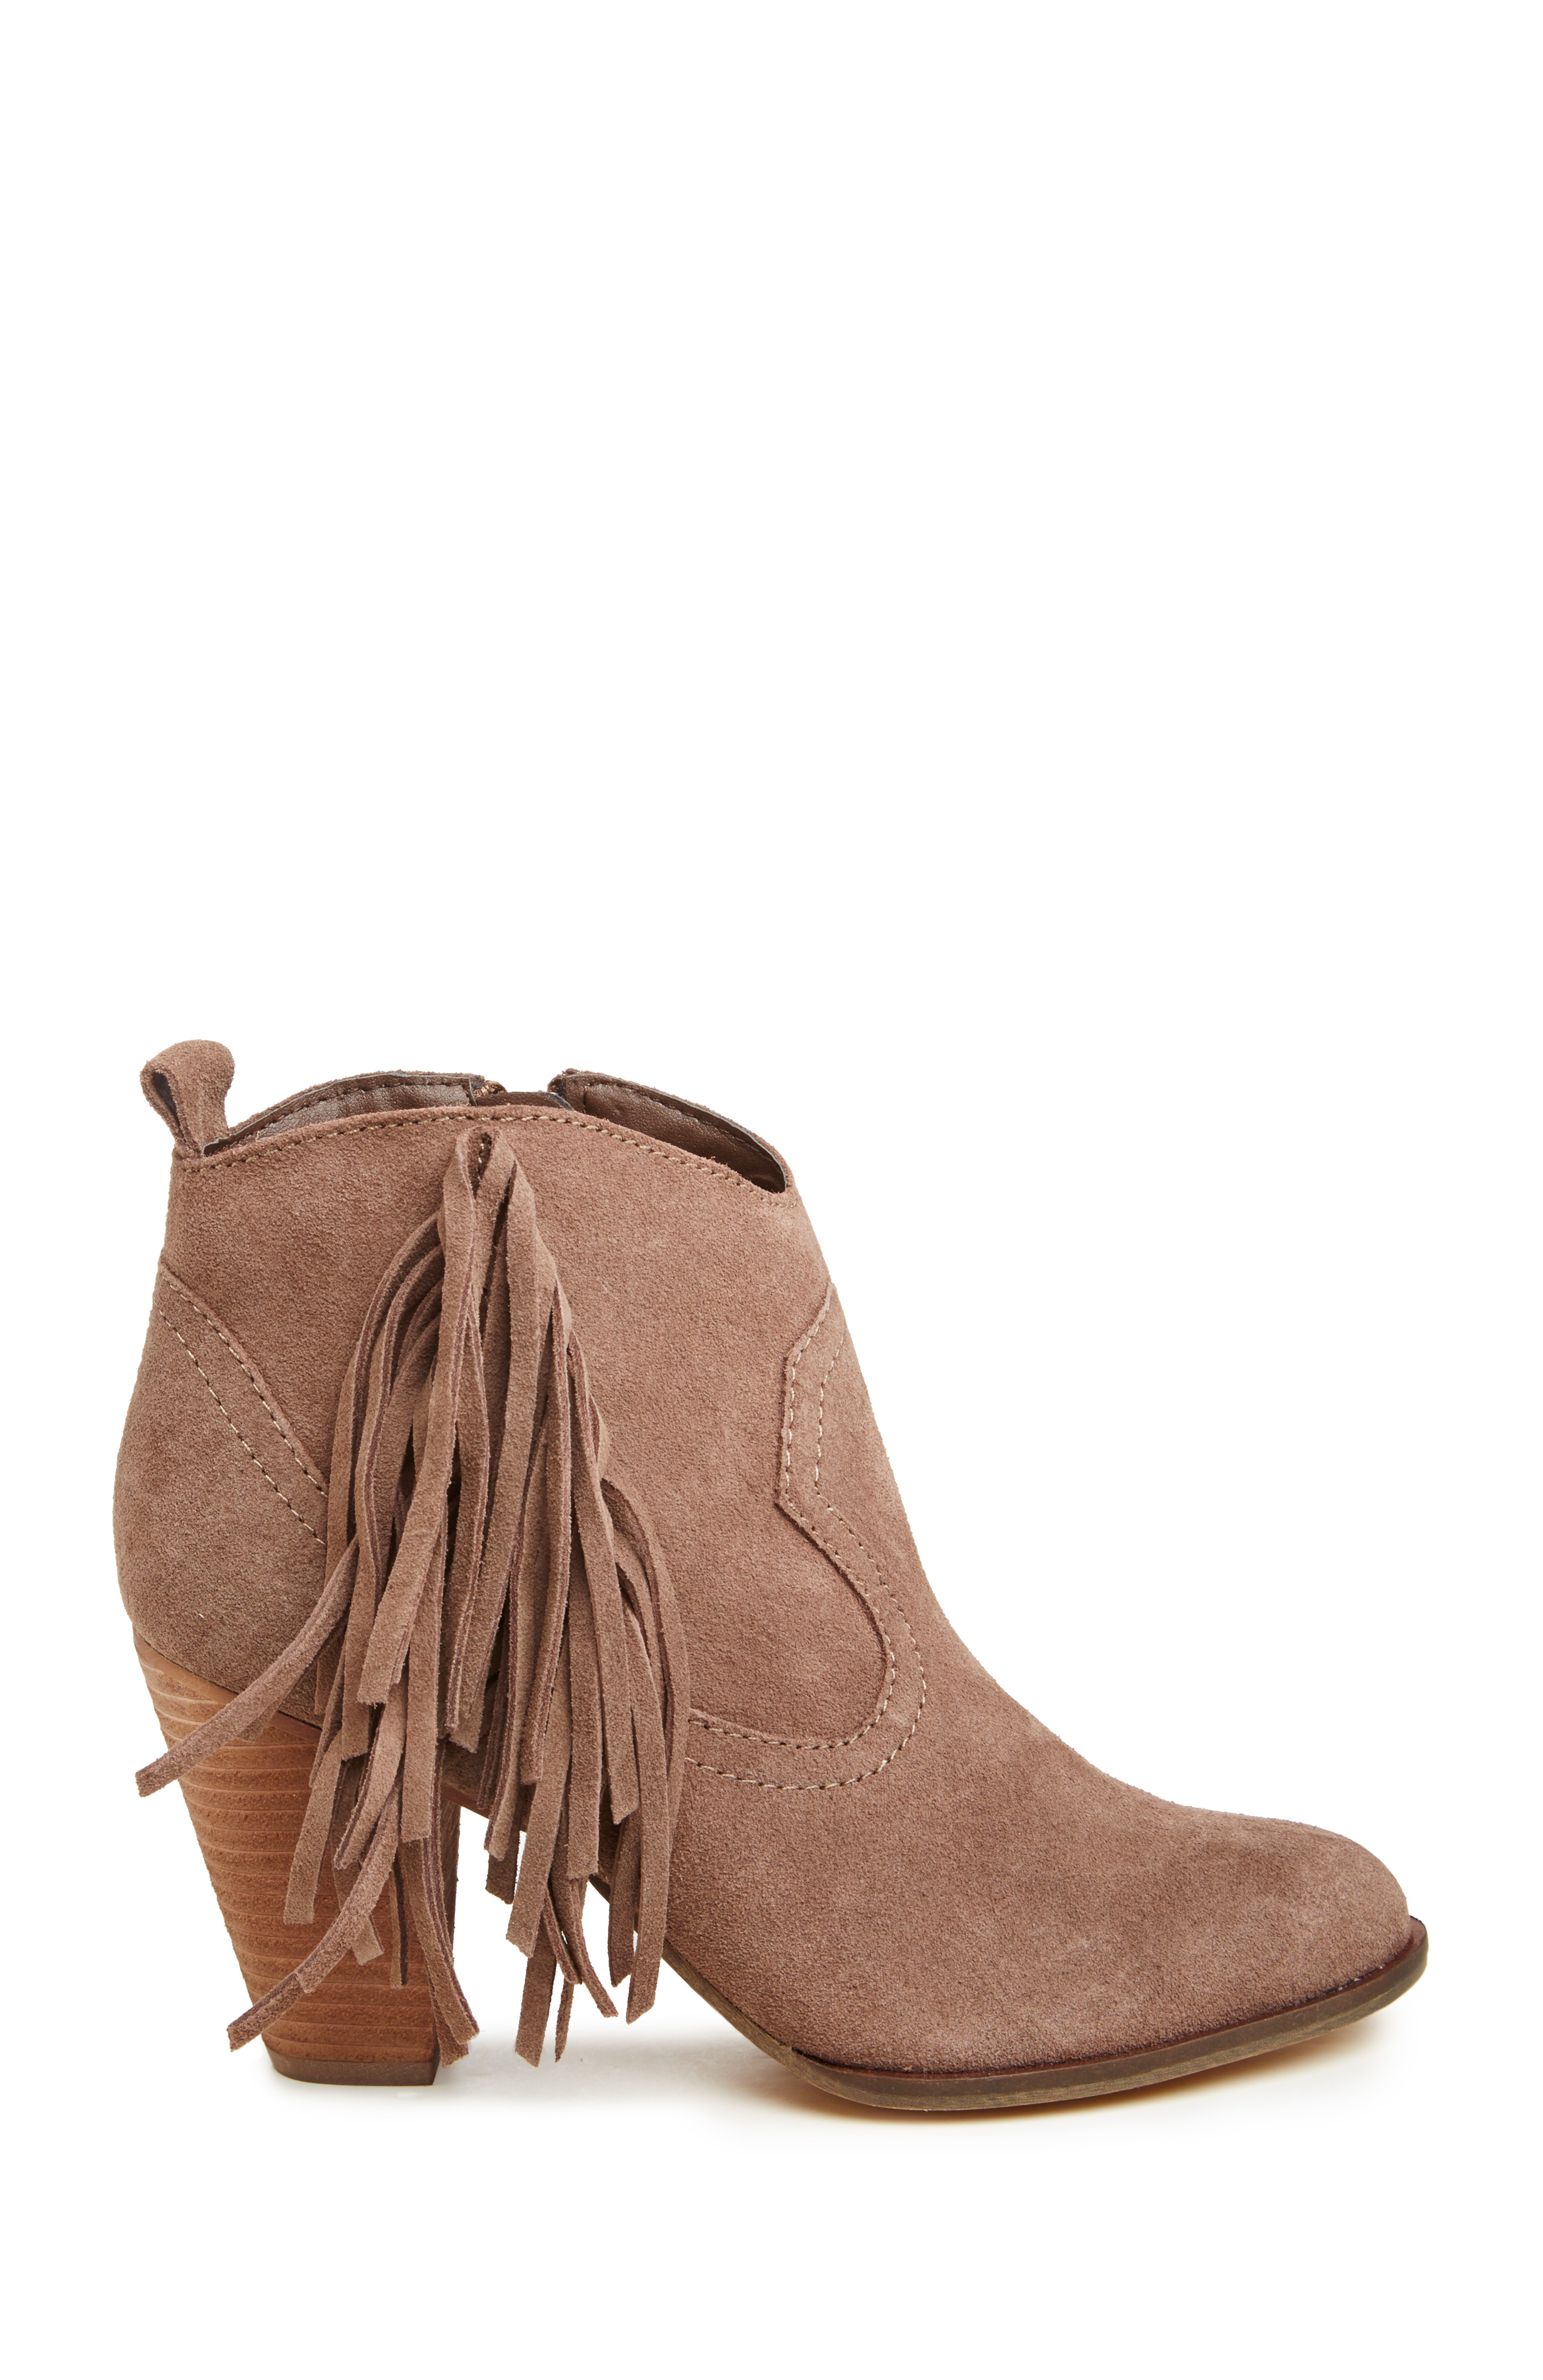 Steve Madden Ponncho Fringe Booties in Taupe | DAILYLOOK